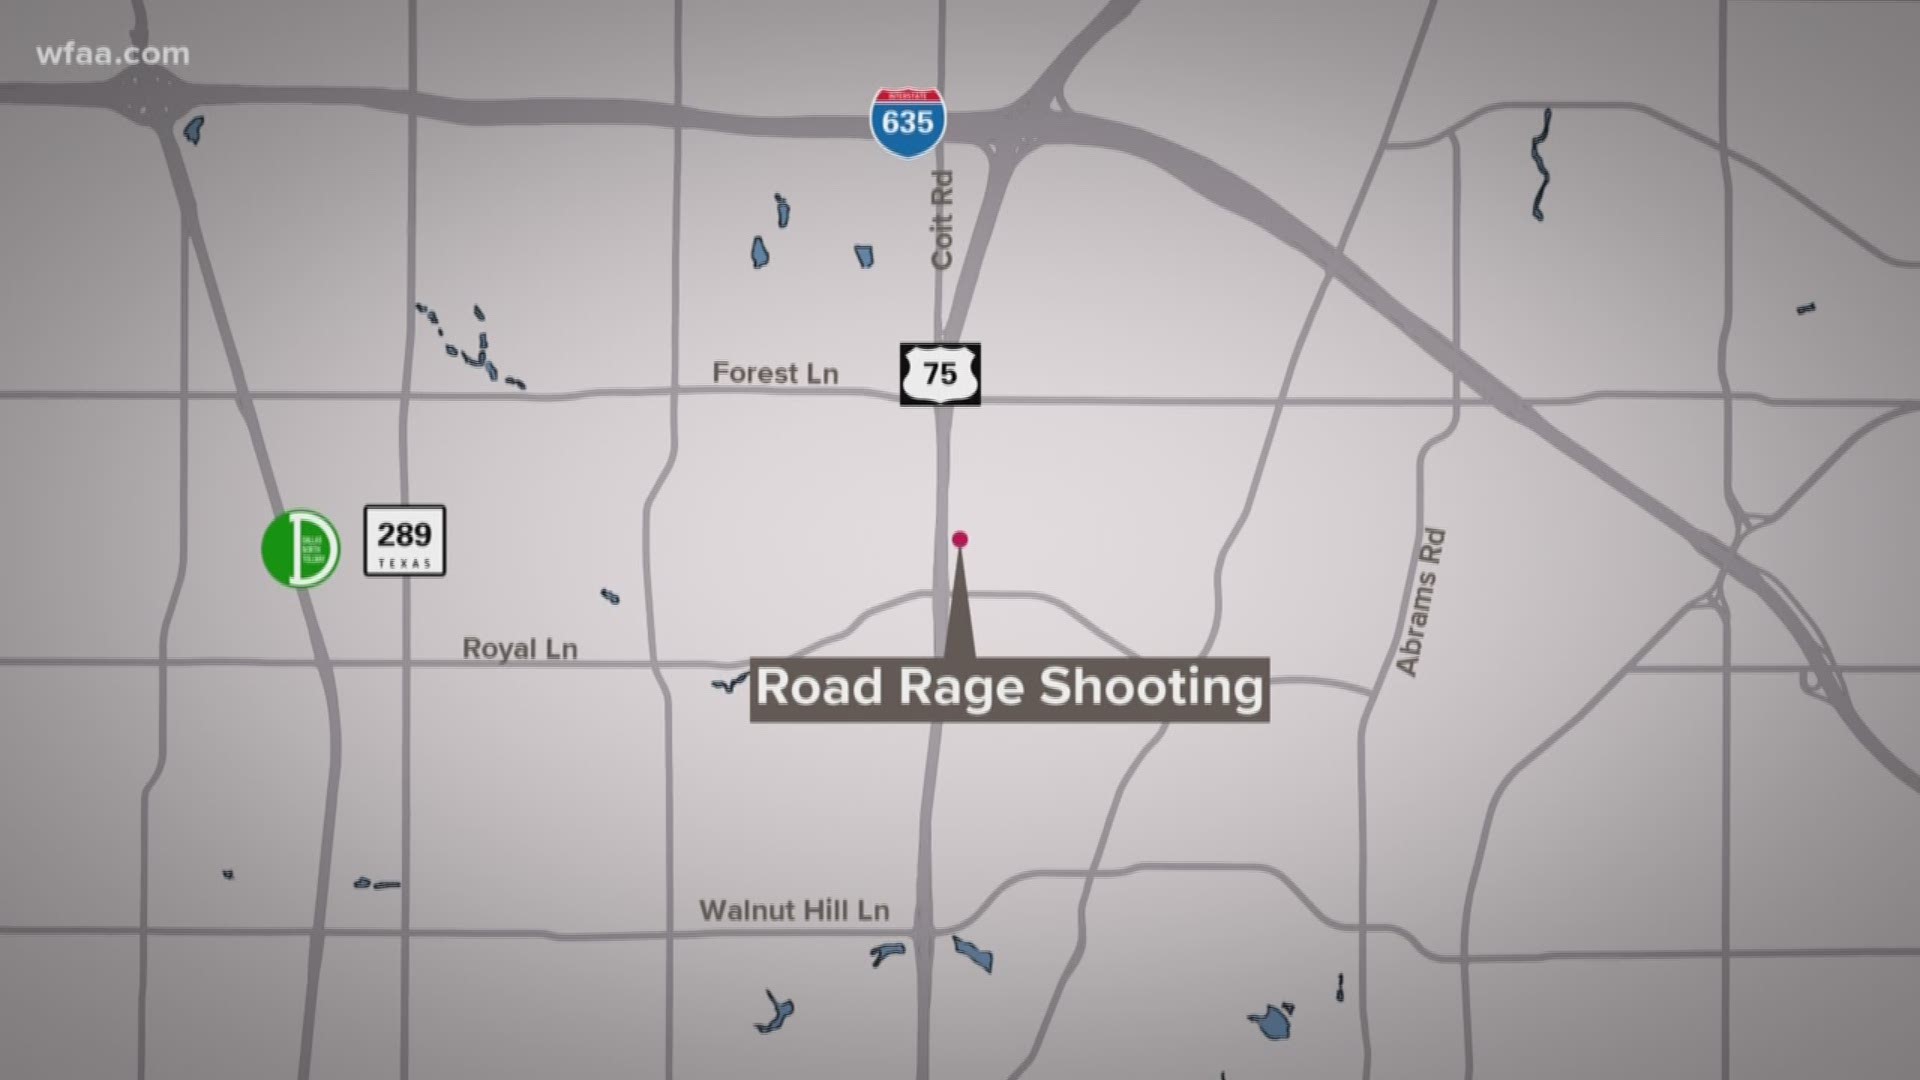 A woman was transported to the hospital following a suspected road rage incident.